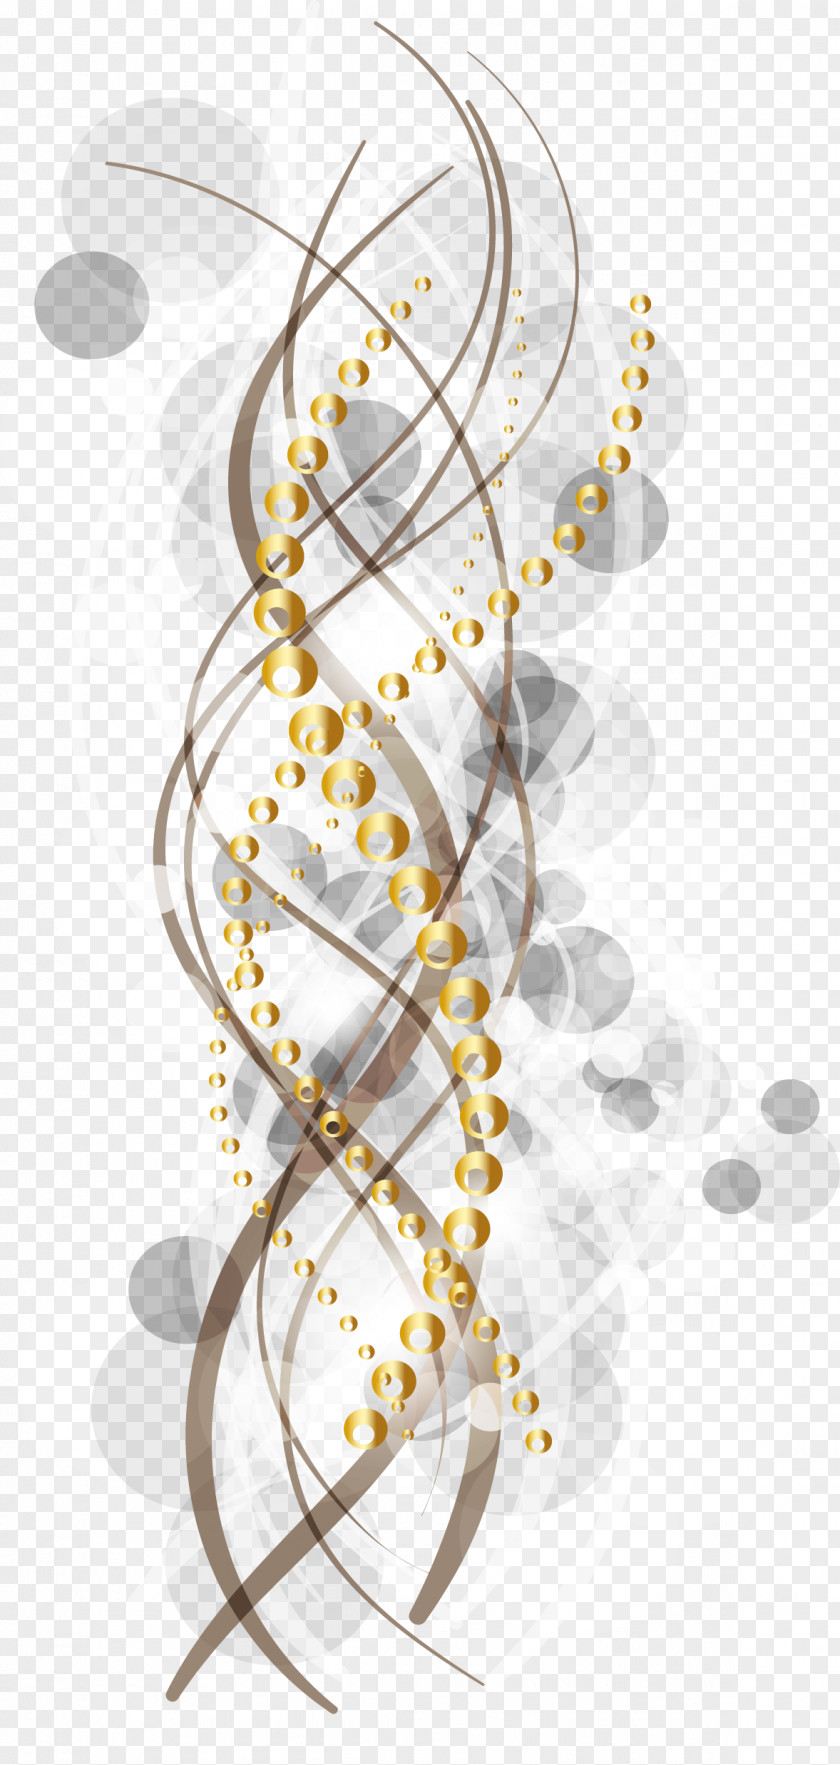 Surrounded By Golden Curly Lines PNG by golden curly lines clipart PNG